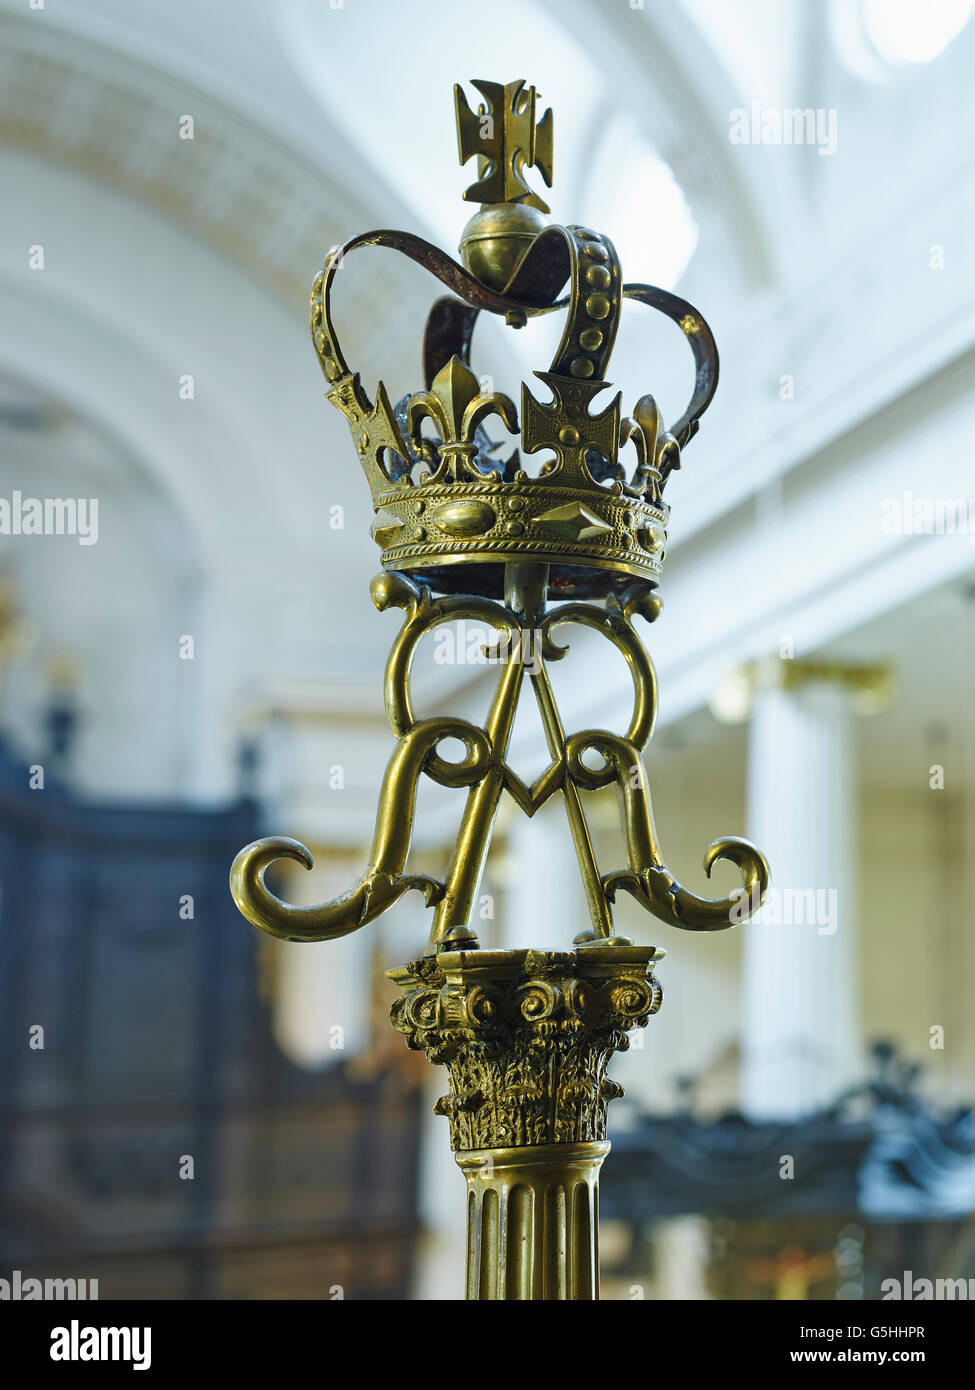 St Magnus the Martyr church in the City of London. Candlesticks with crown and AR, Queen Anne's cypher. Stock Photo